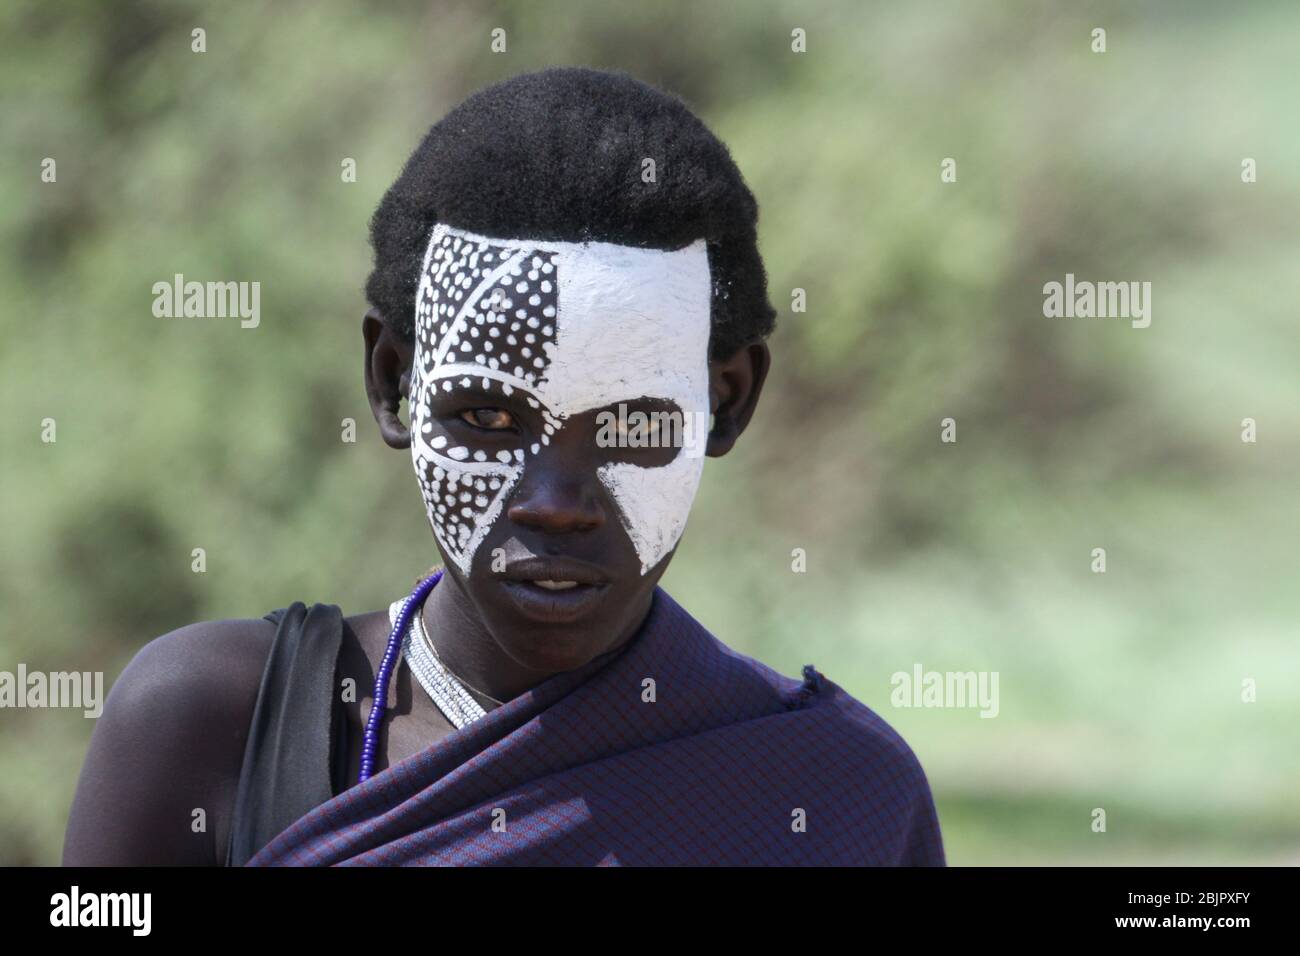 A teenage Maasai with painted face after the 'emorata' ceremony, which is the circumcision and right of passage to become a member of the warrior or ' Stock Photo